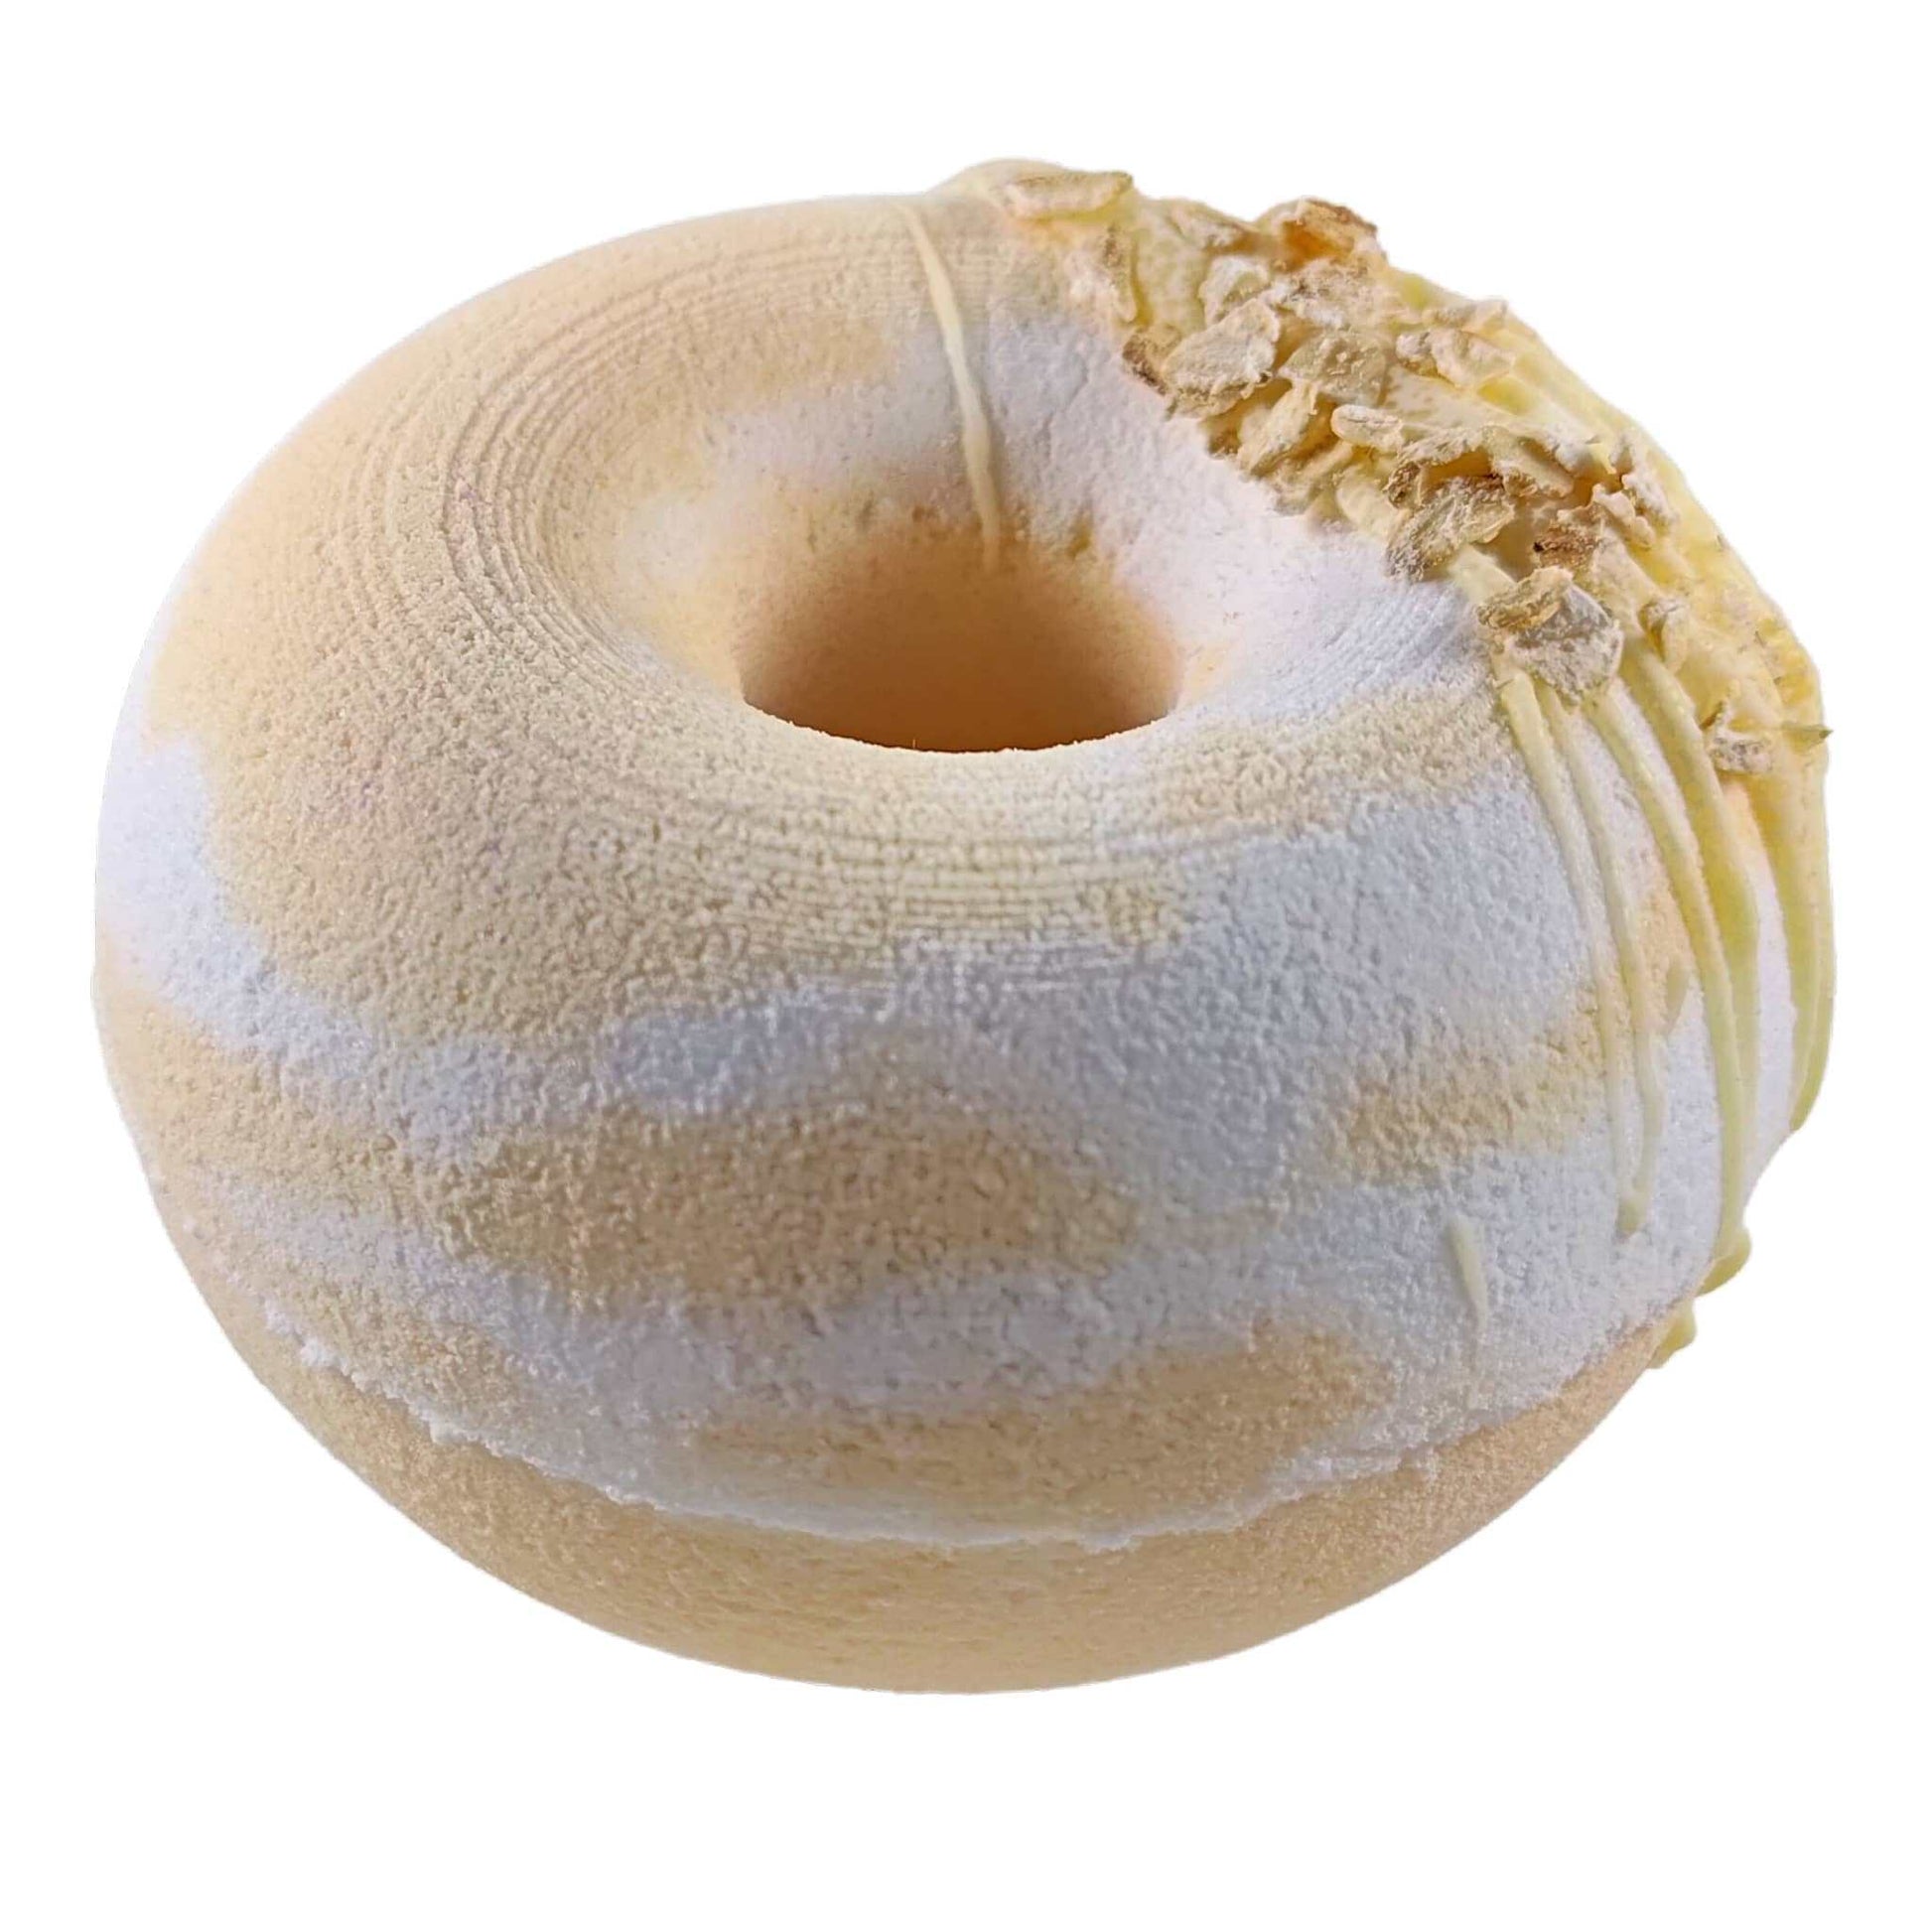 Experience the ultimate relaxation with our honey oatmeal donut fizzy bath bomb. Enjoy its calming effects and radiant skin!